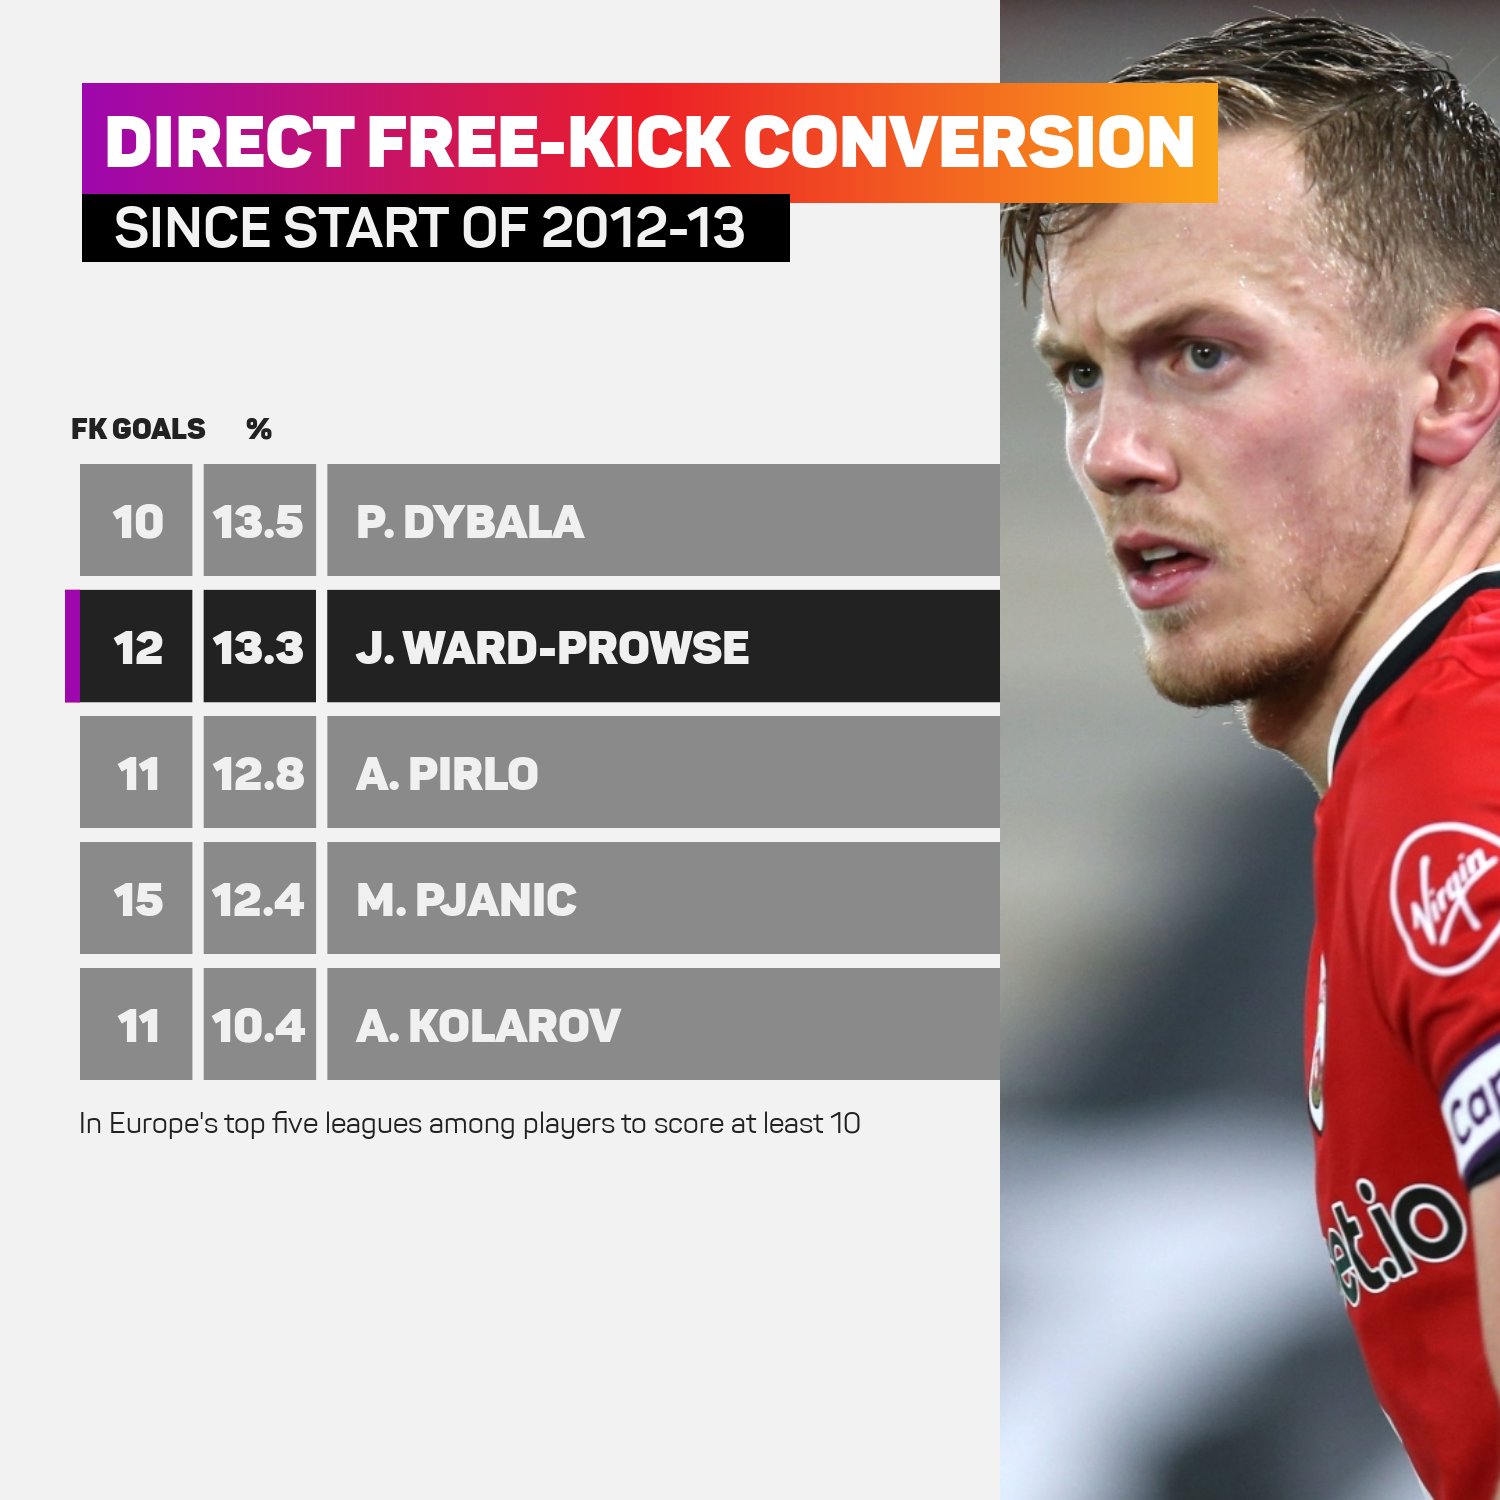 James Ward-Prowse and direct free-kick goals since 2012-13, as of 21012022